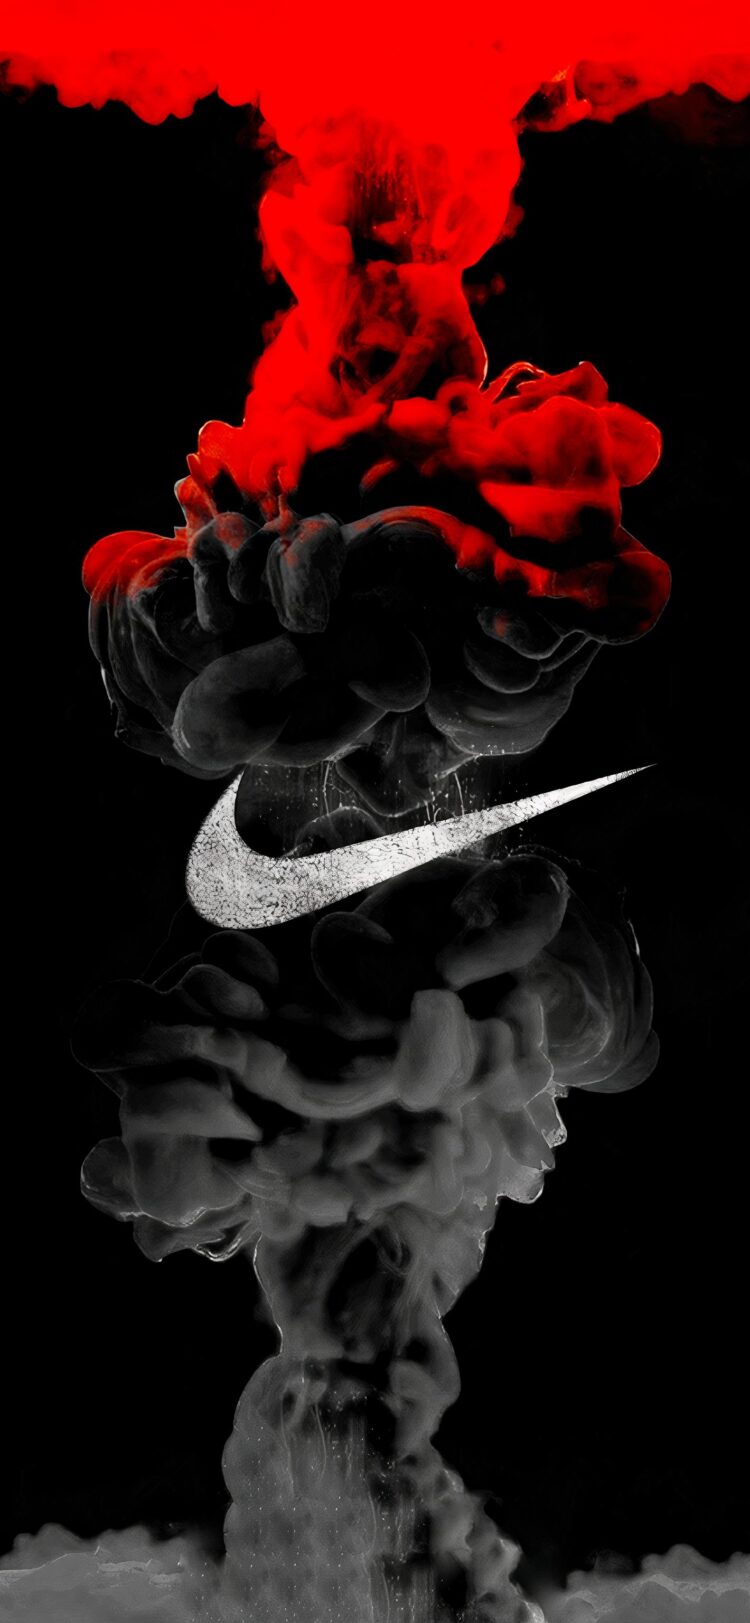 Nike Nuclear Bomb - Wallpapers Central